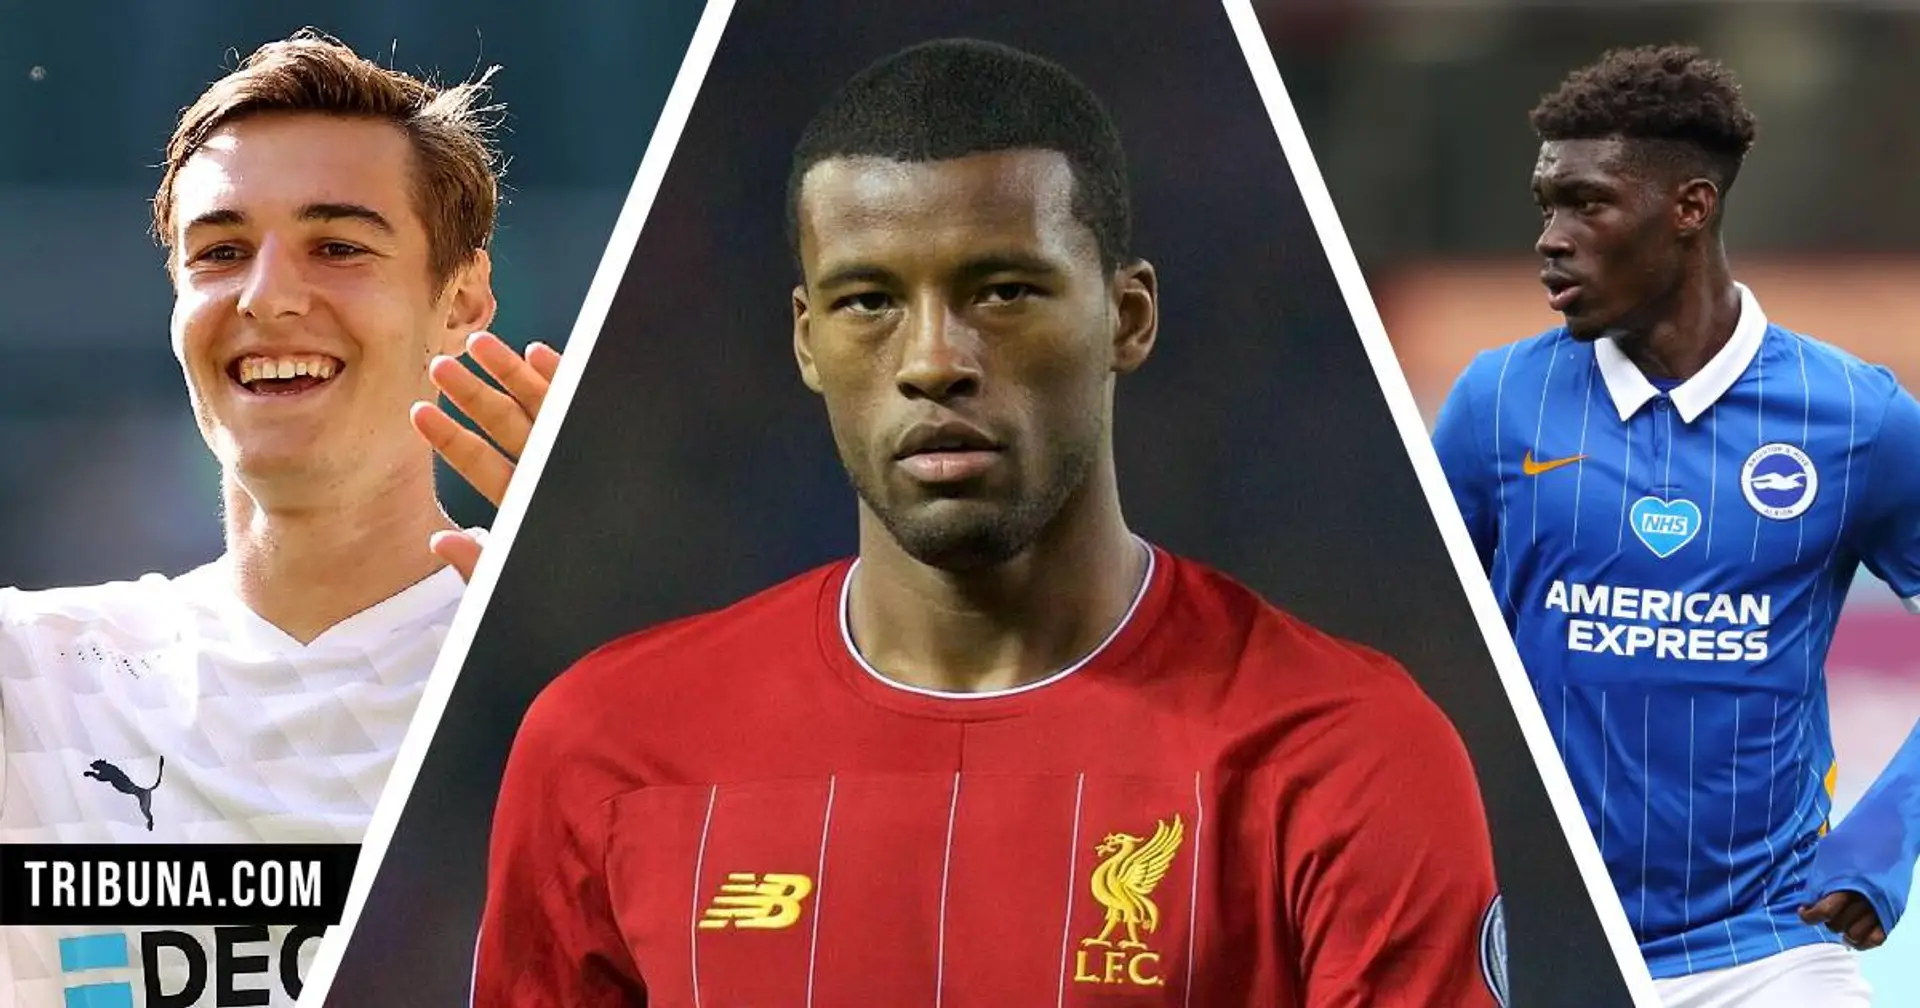 🤔 If Wijnaldum leaves Liverpool, which player would you replace him with? 